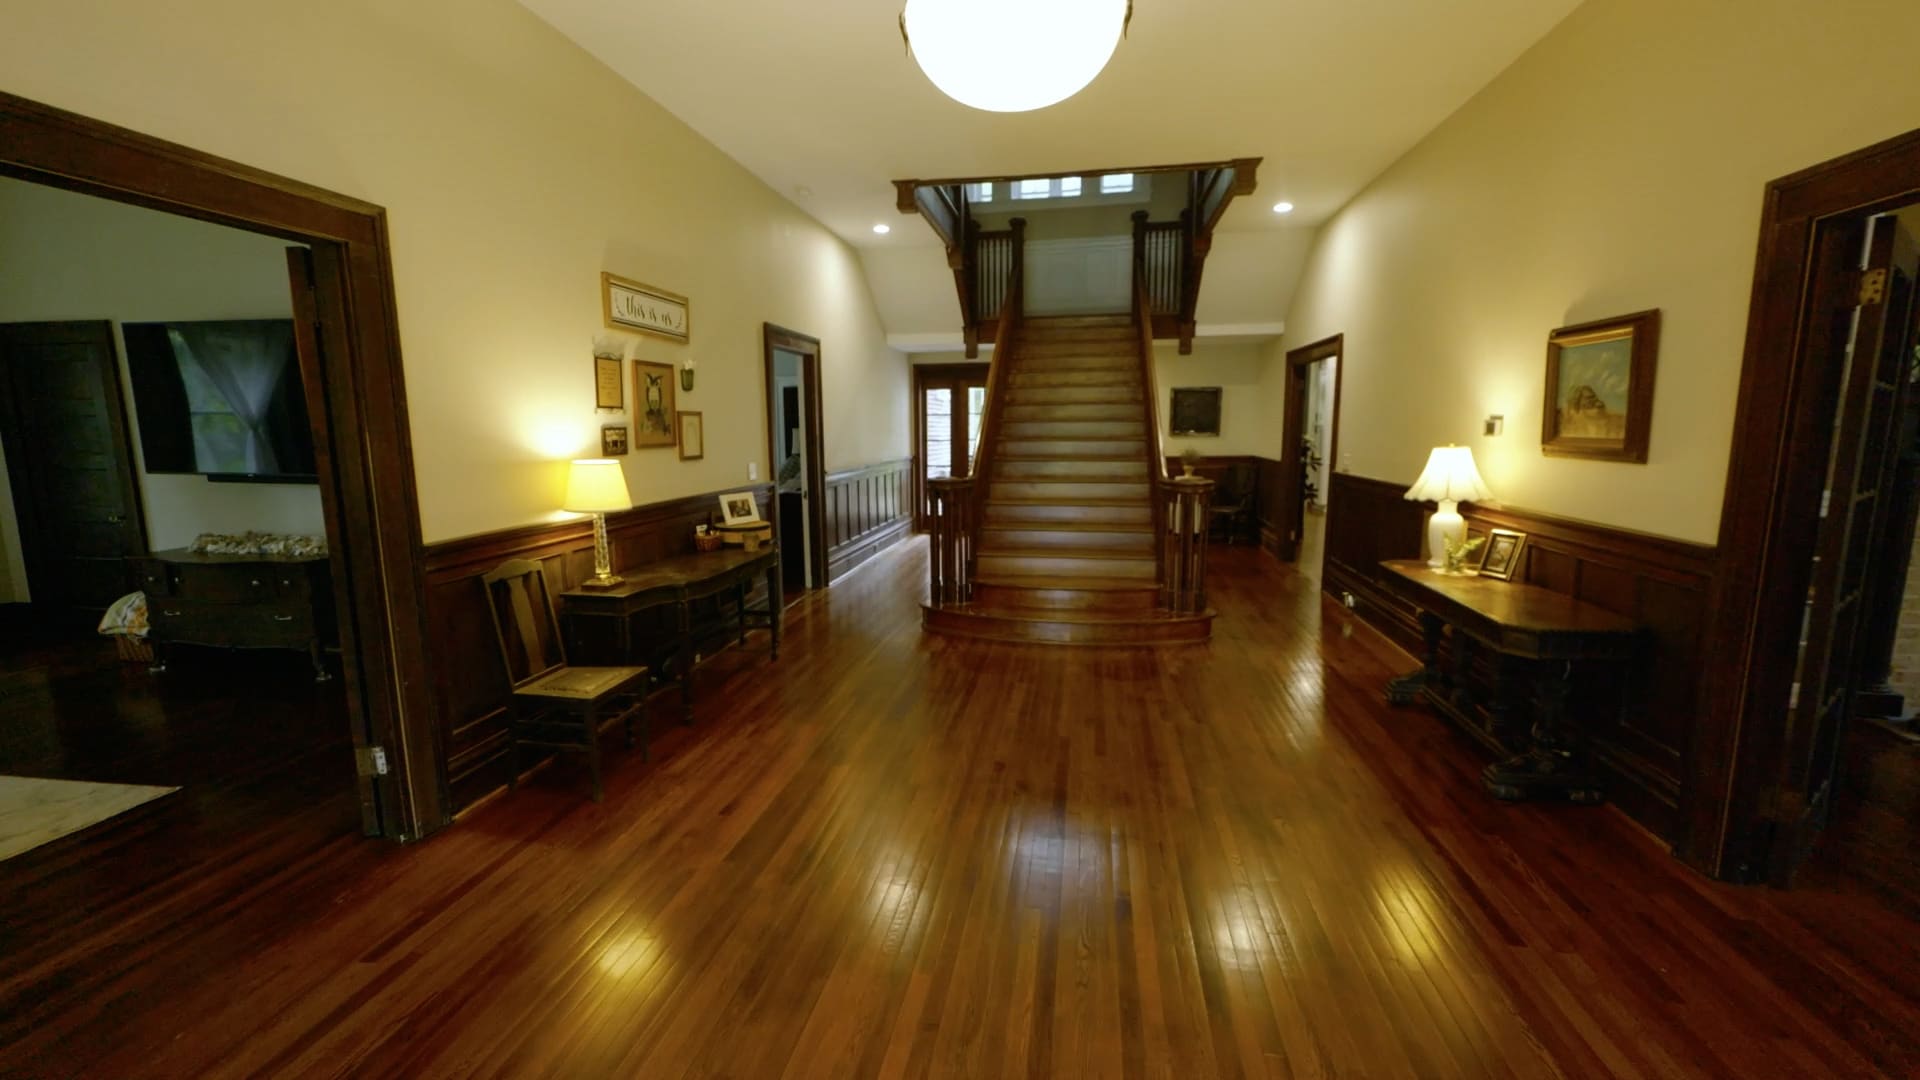 One of the couple's biggest projects involved restoring the house's original wooden floors, which were more than a century old.